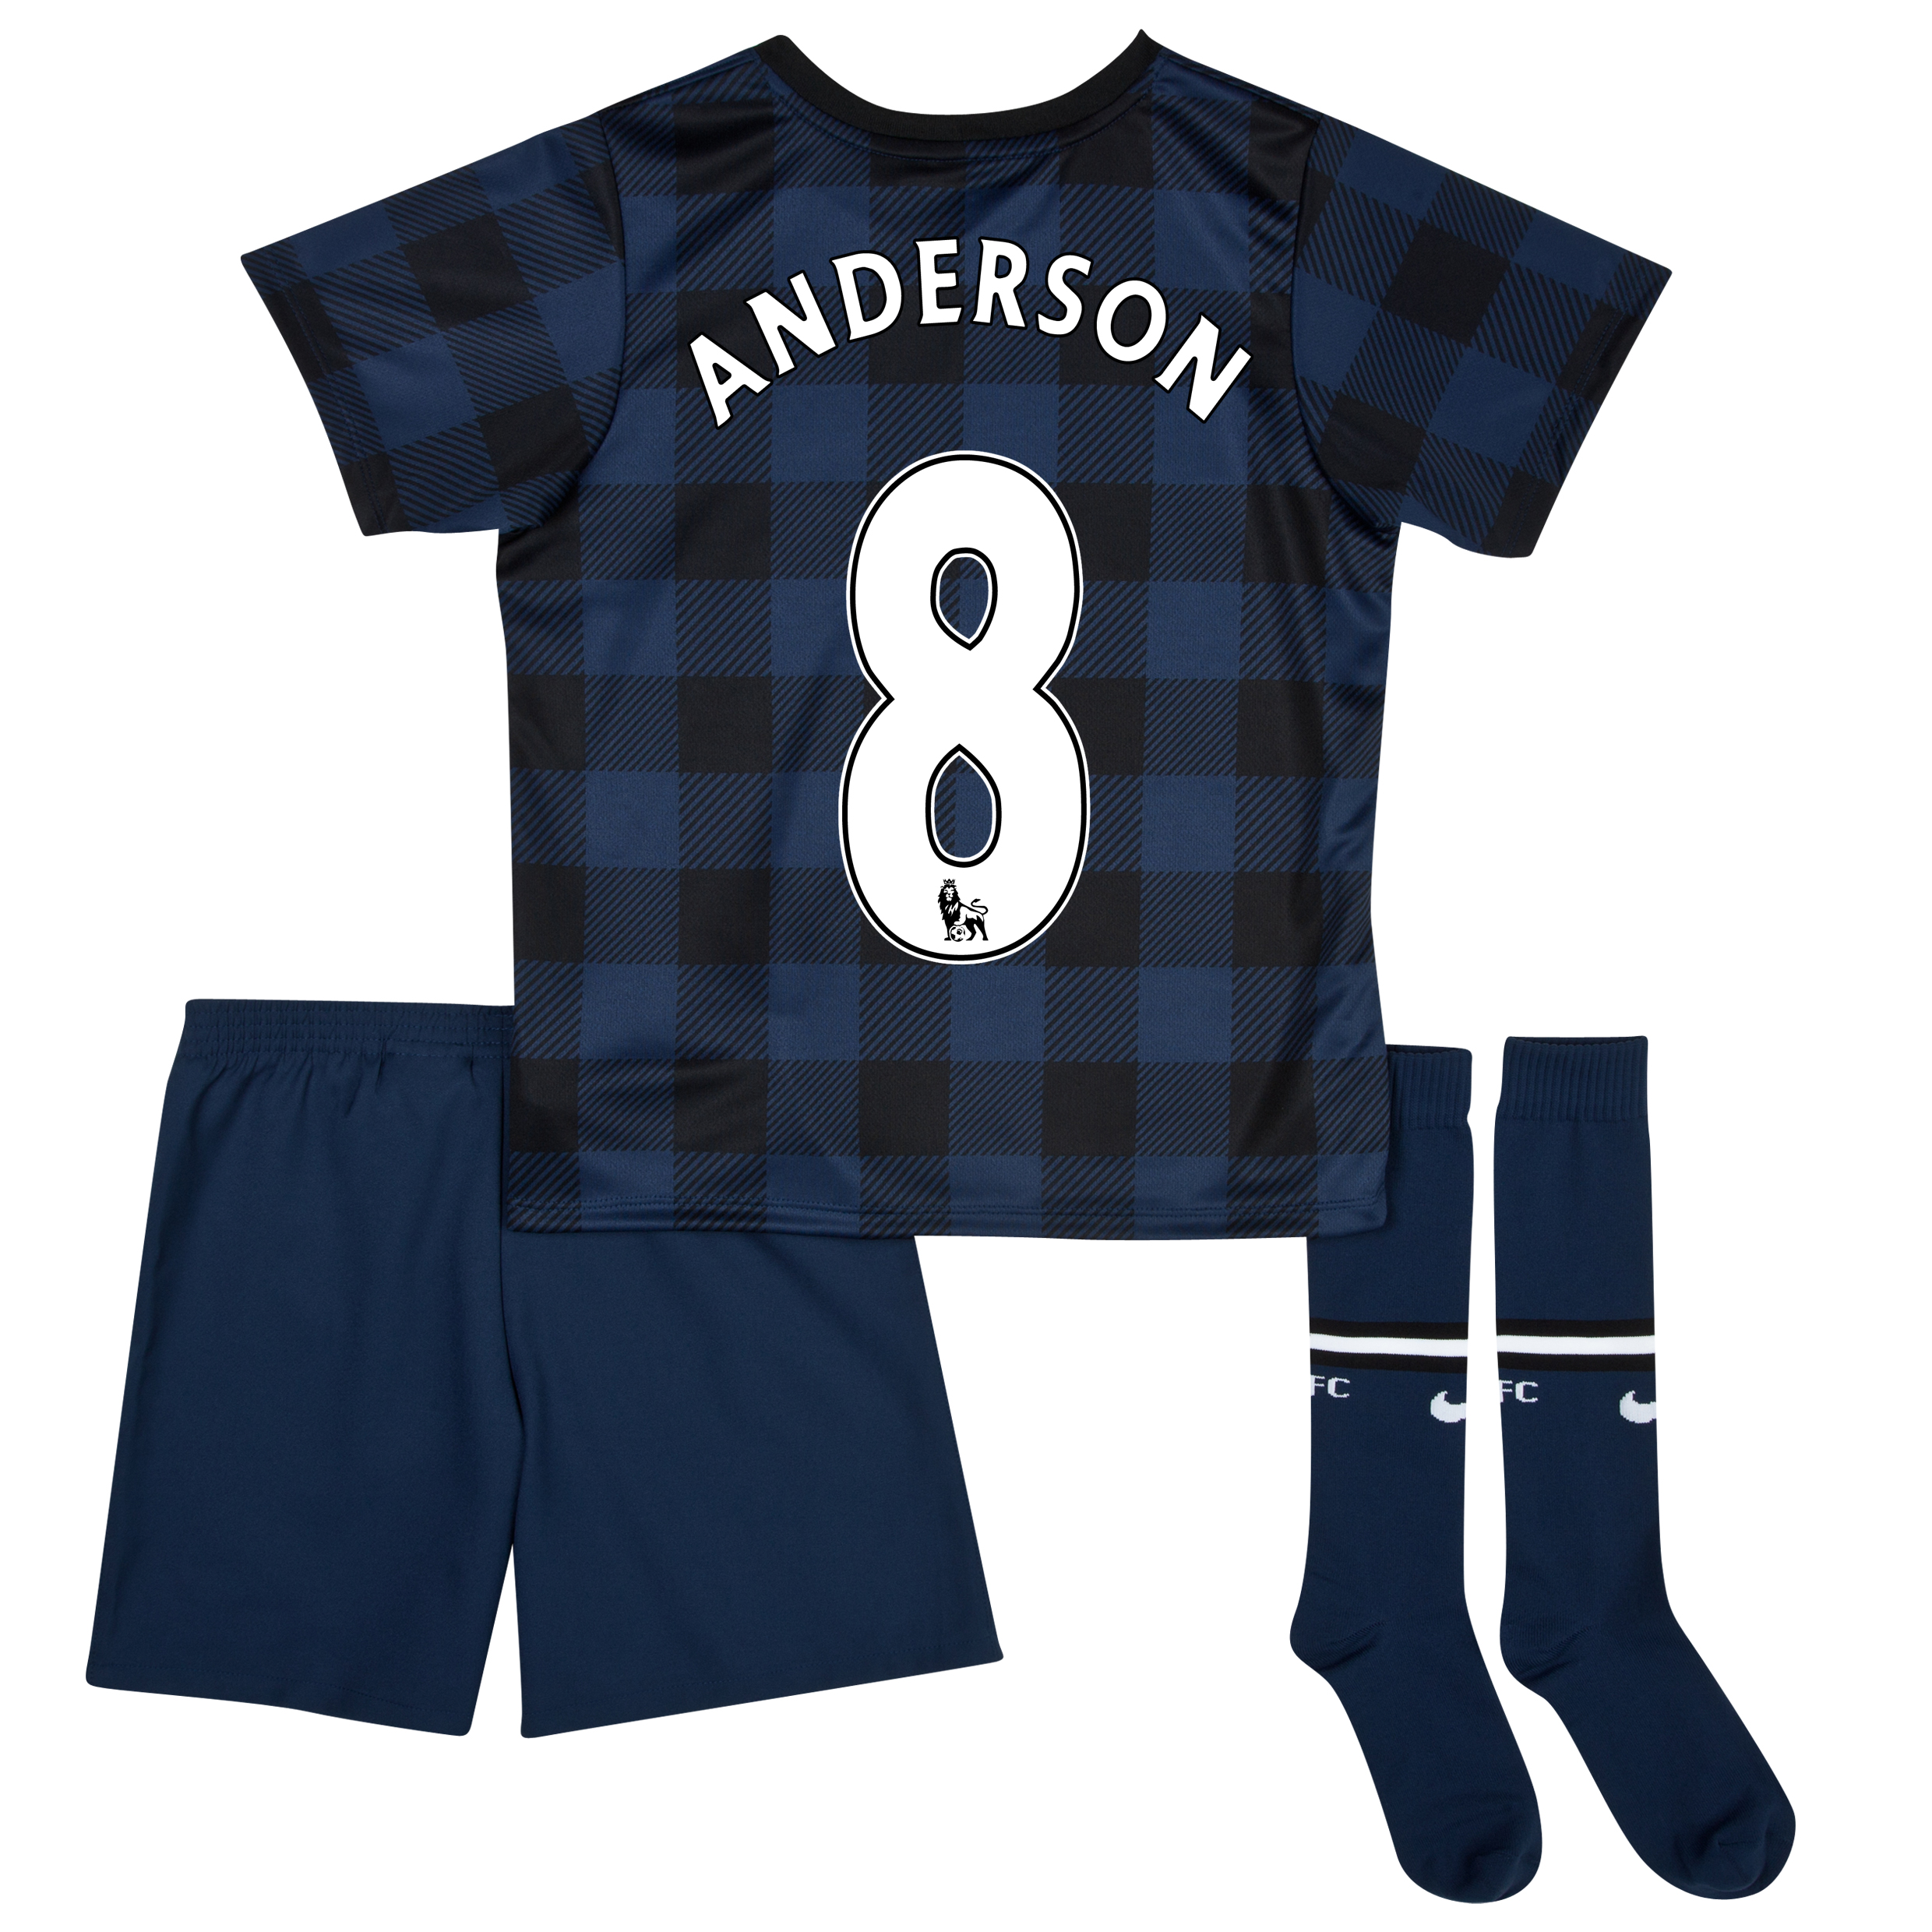 Manchester United Away Kit 2013/14 - Little Boys with Anderson 8 printing